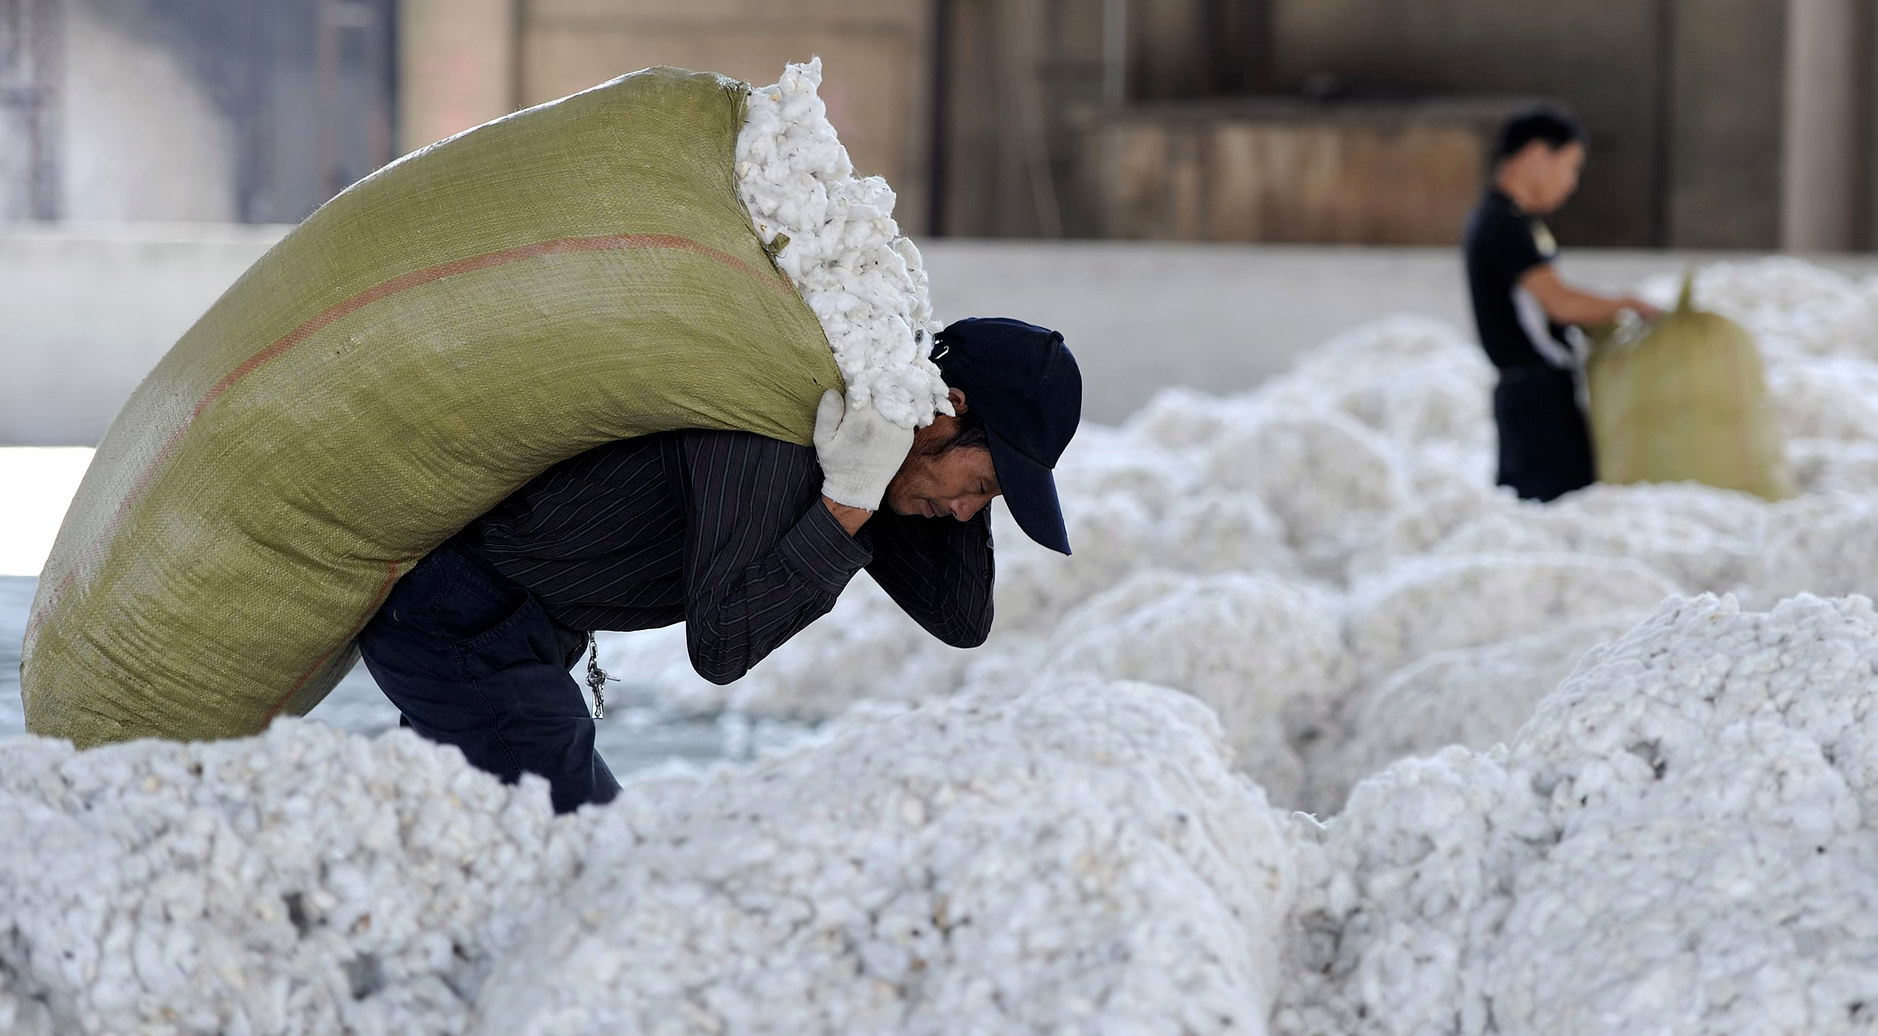 Trace Planet — The Dark Side of the Cotton Industry